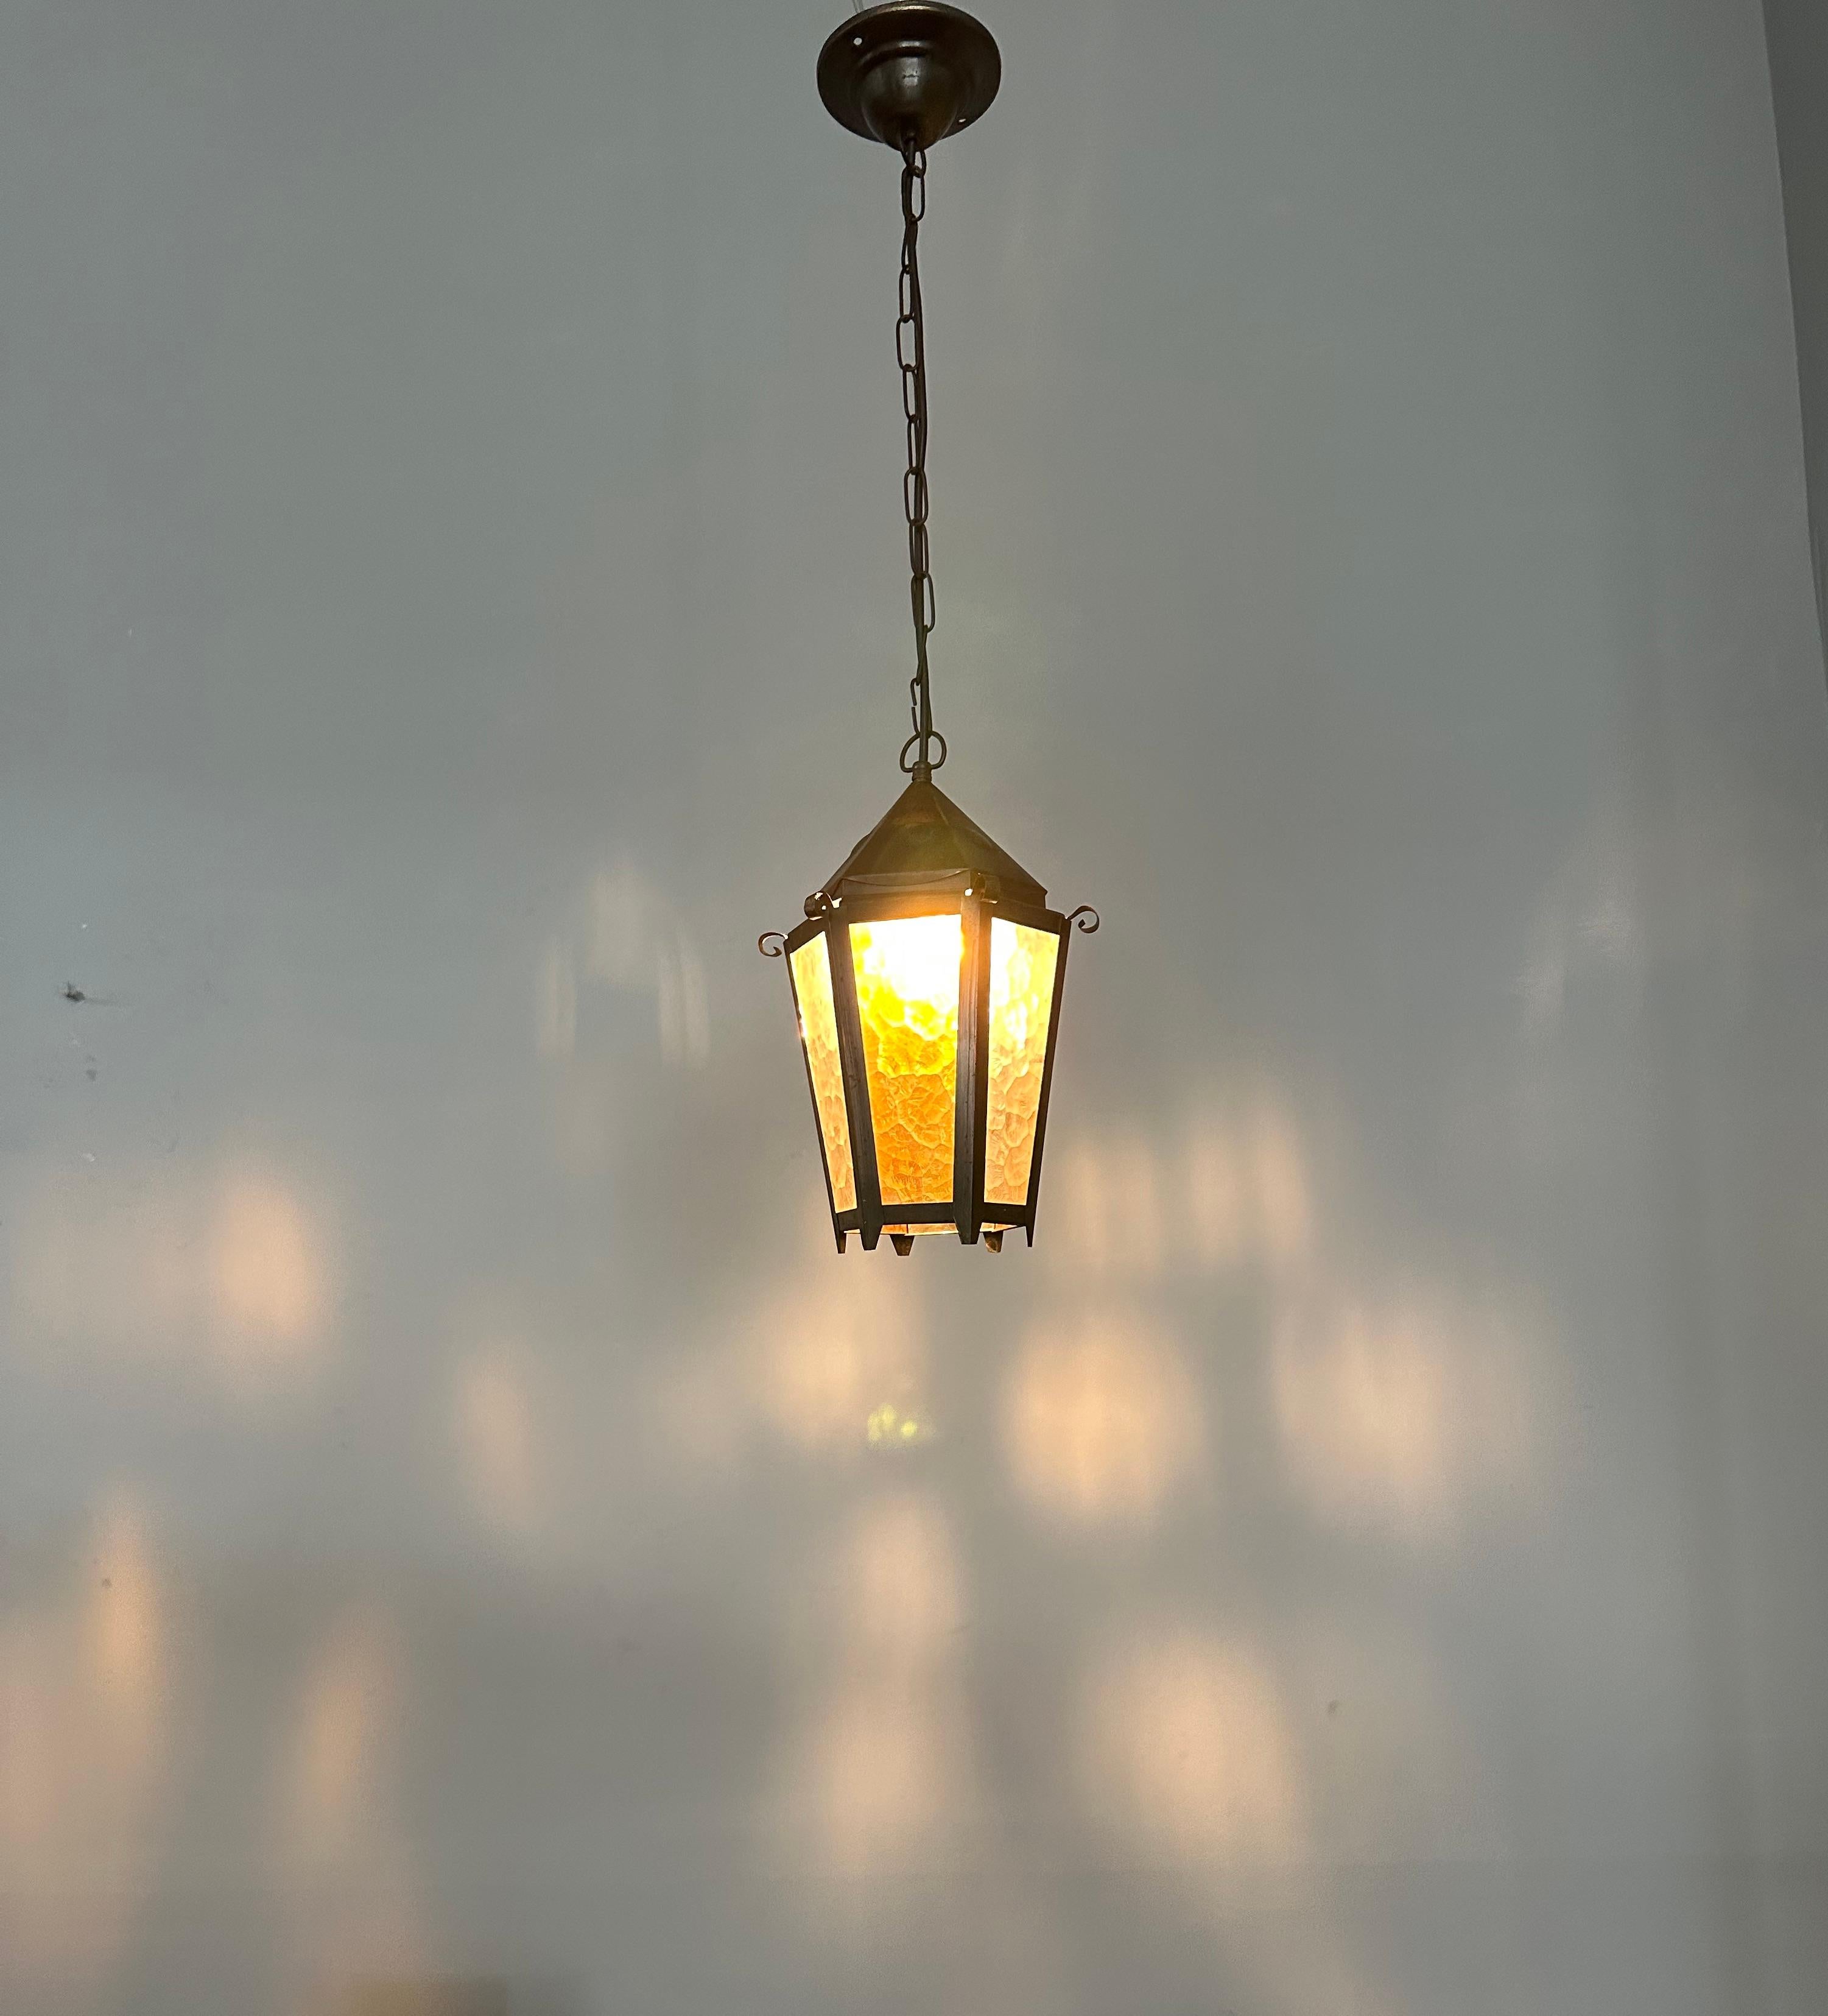 Good quality and small size, handcrafted entry hall light fixture.

With early 20th century lighting as one of our specialities, we are always happy to find a pendant, lantern or chandelier that we have never seen before. This Arts & Crafts lantern